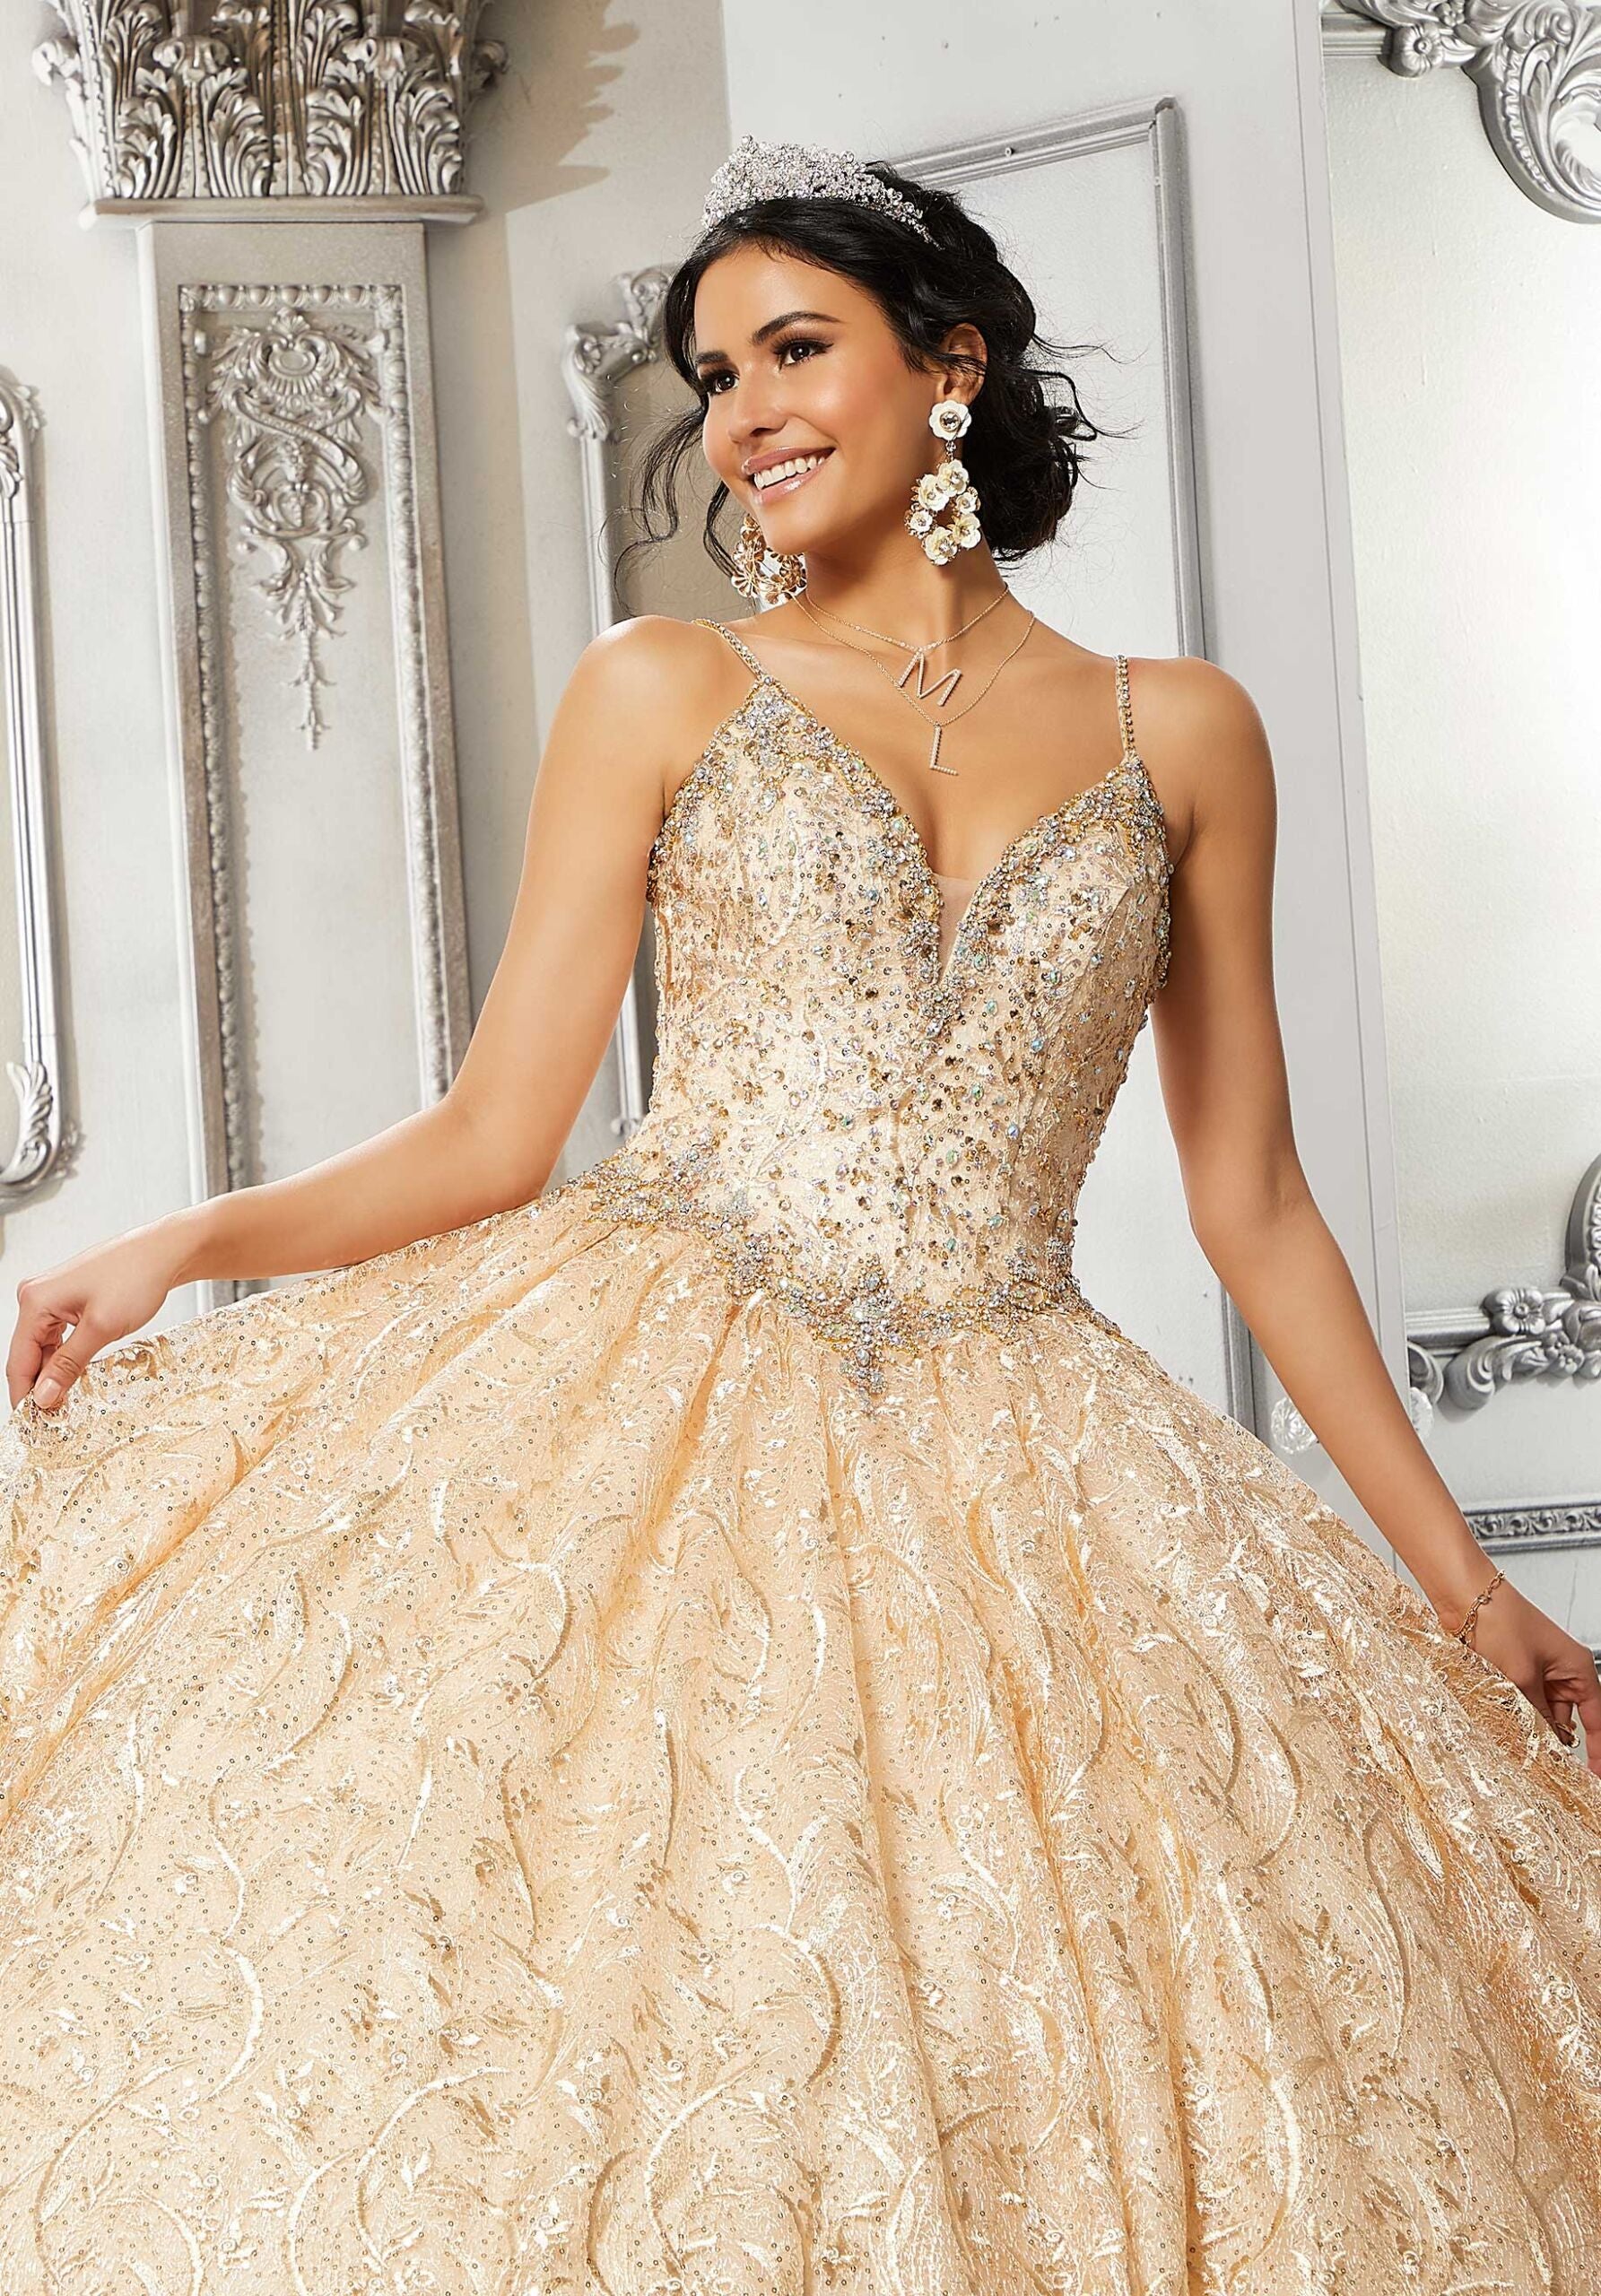 Rhinestone and Sequined Lace Quinceañera Dress